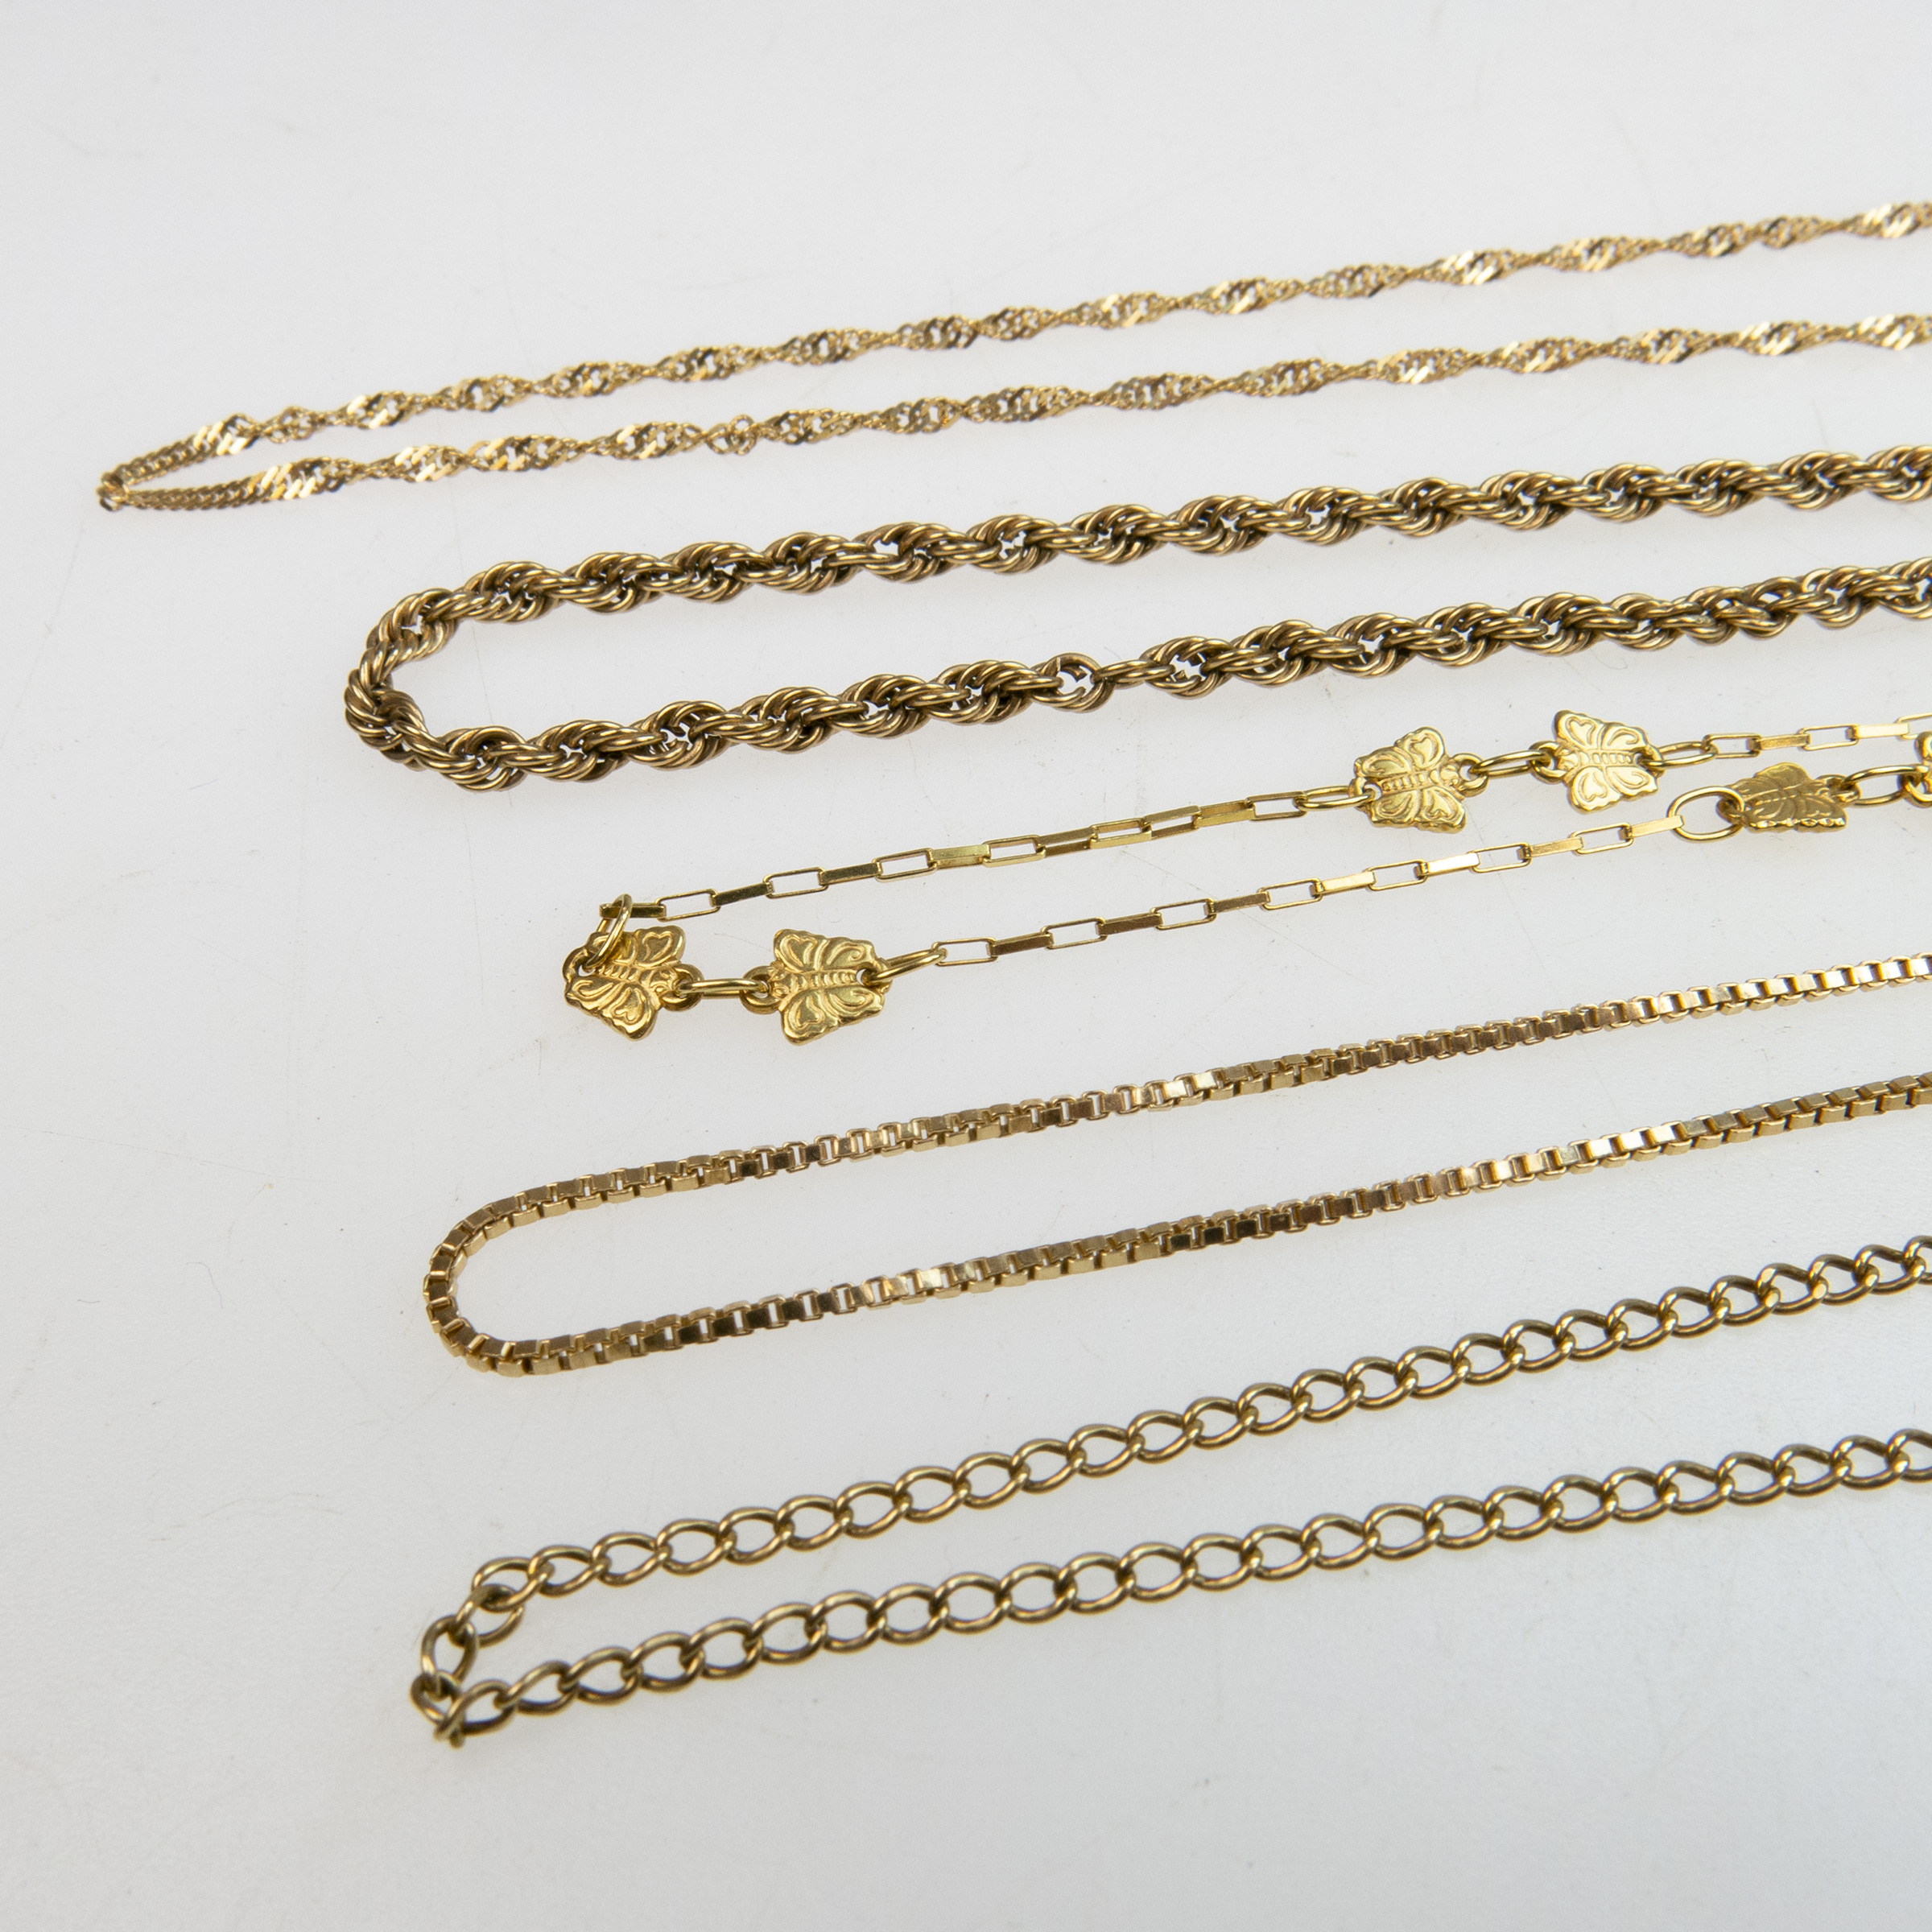 1 x 18k, 1 x 9k and 3 x 10k Yellow Gold Chains